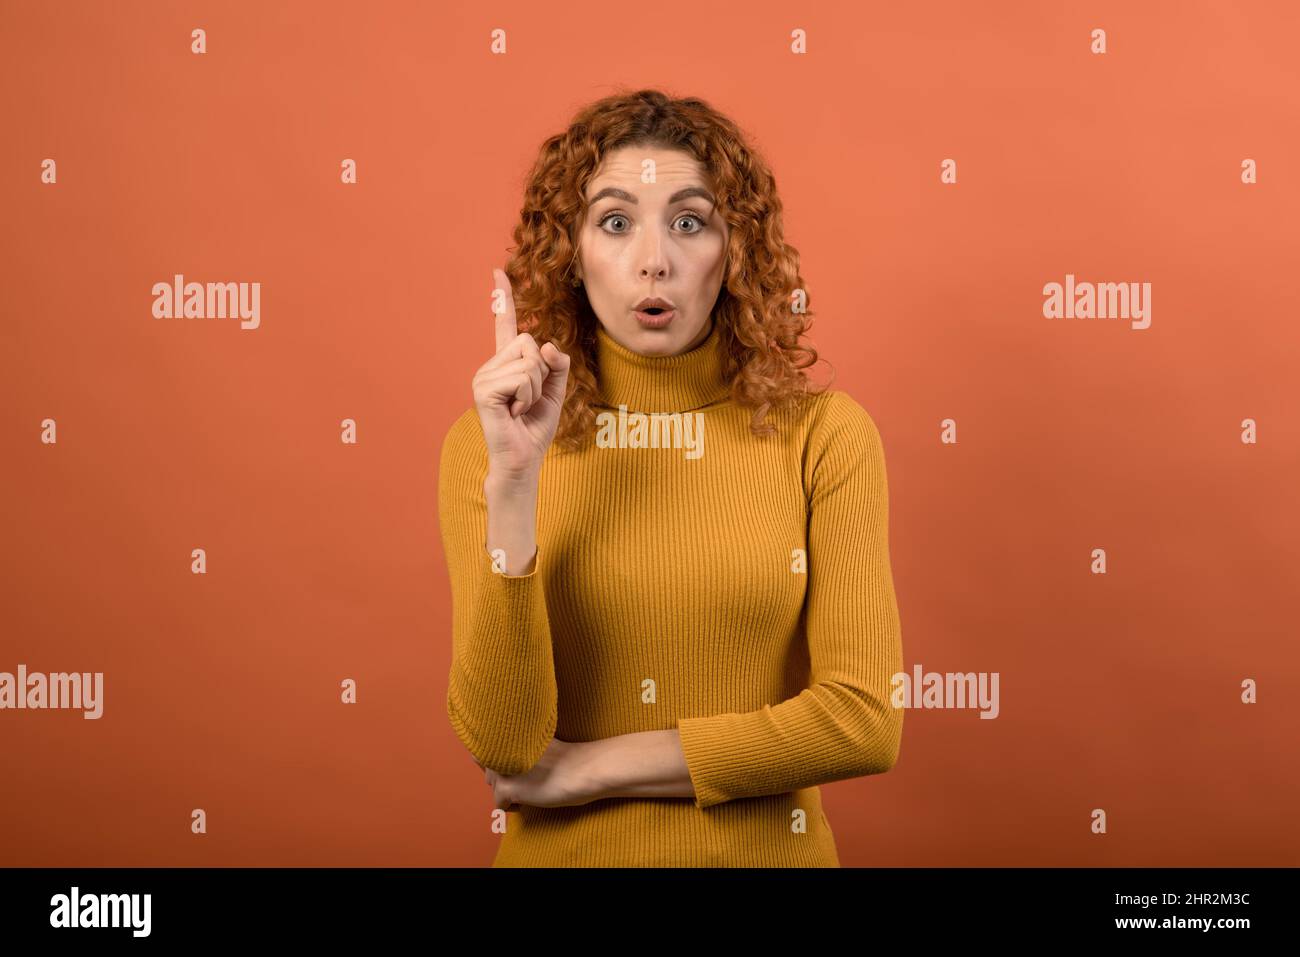 Attractive and young redhead Caucasian girl has an idea isolated on orange studio background. Stock Photo